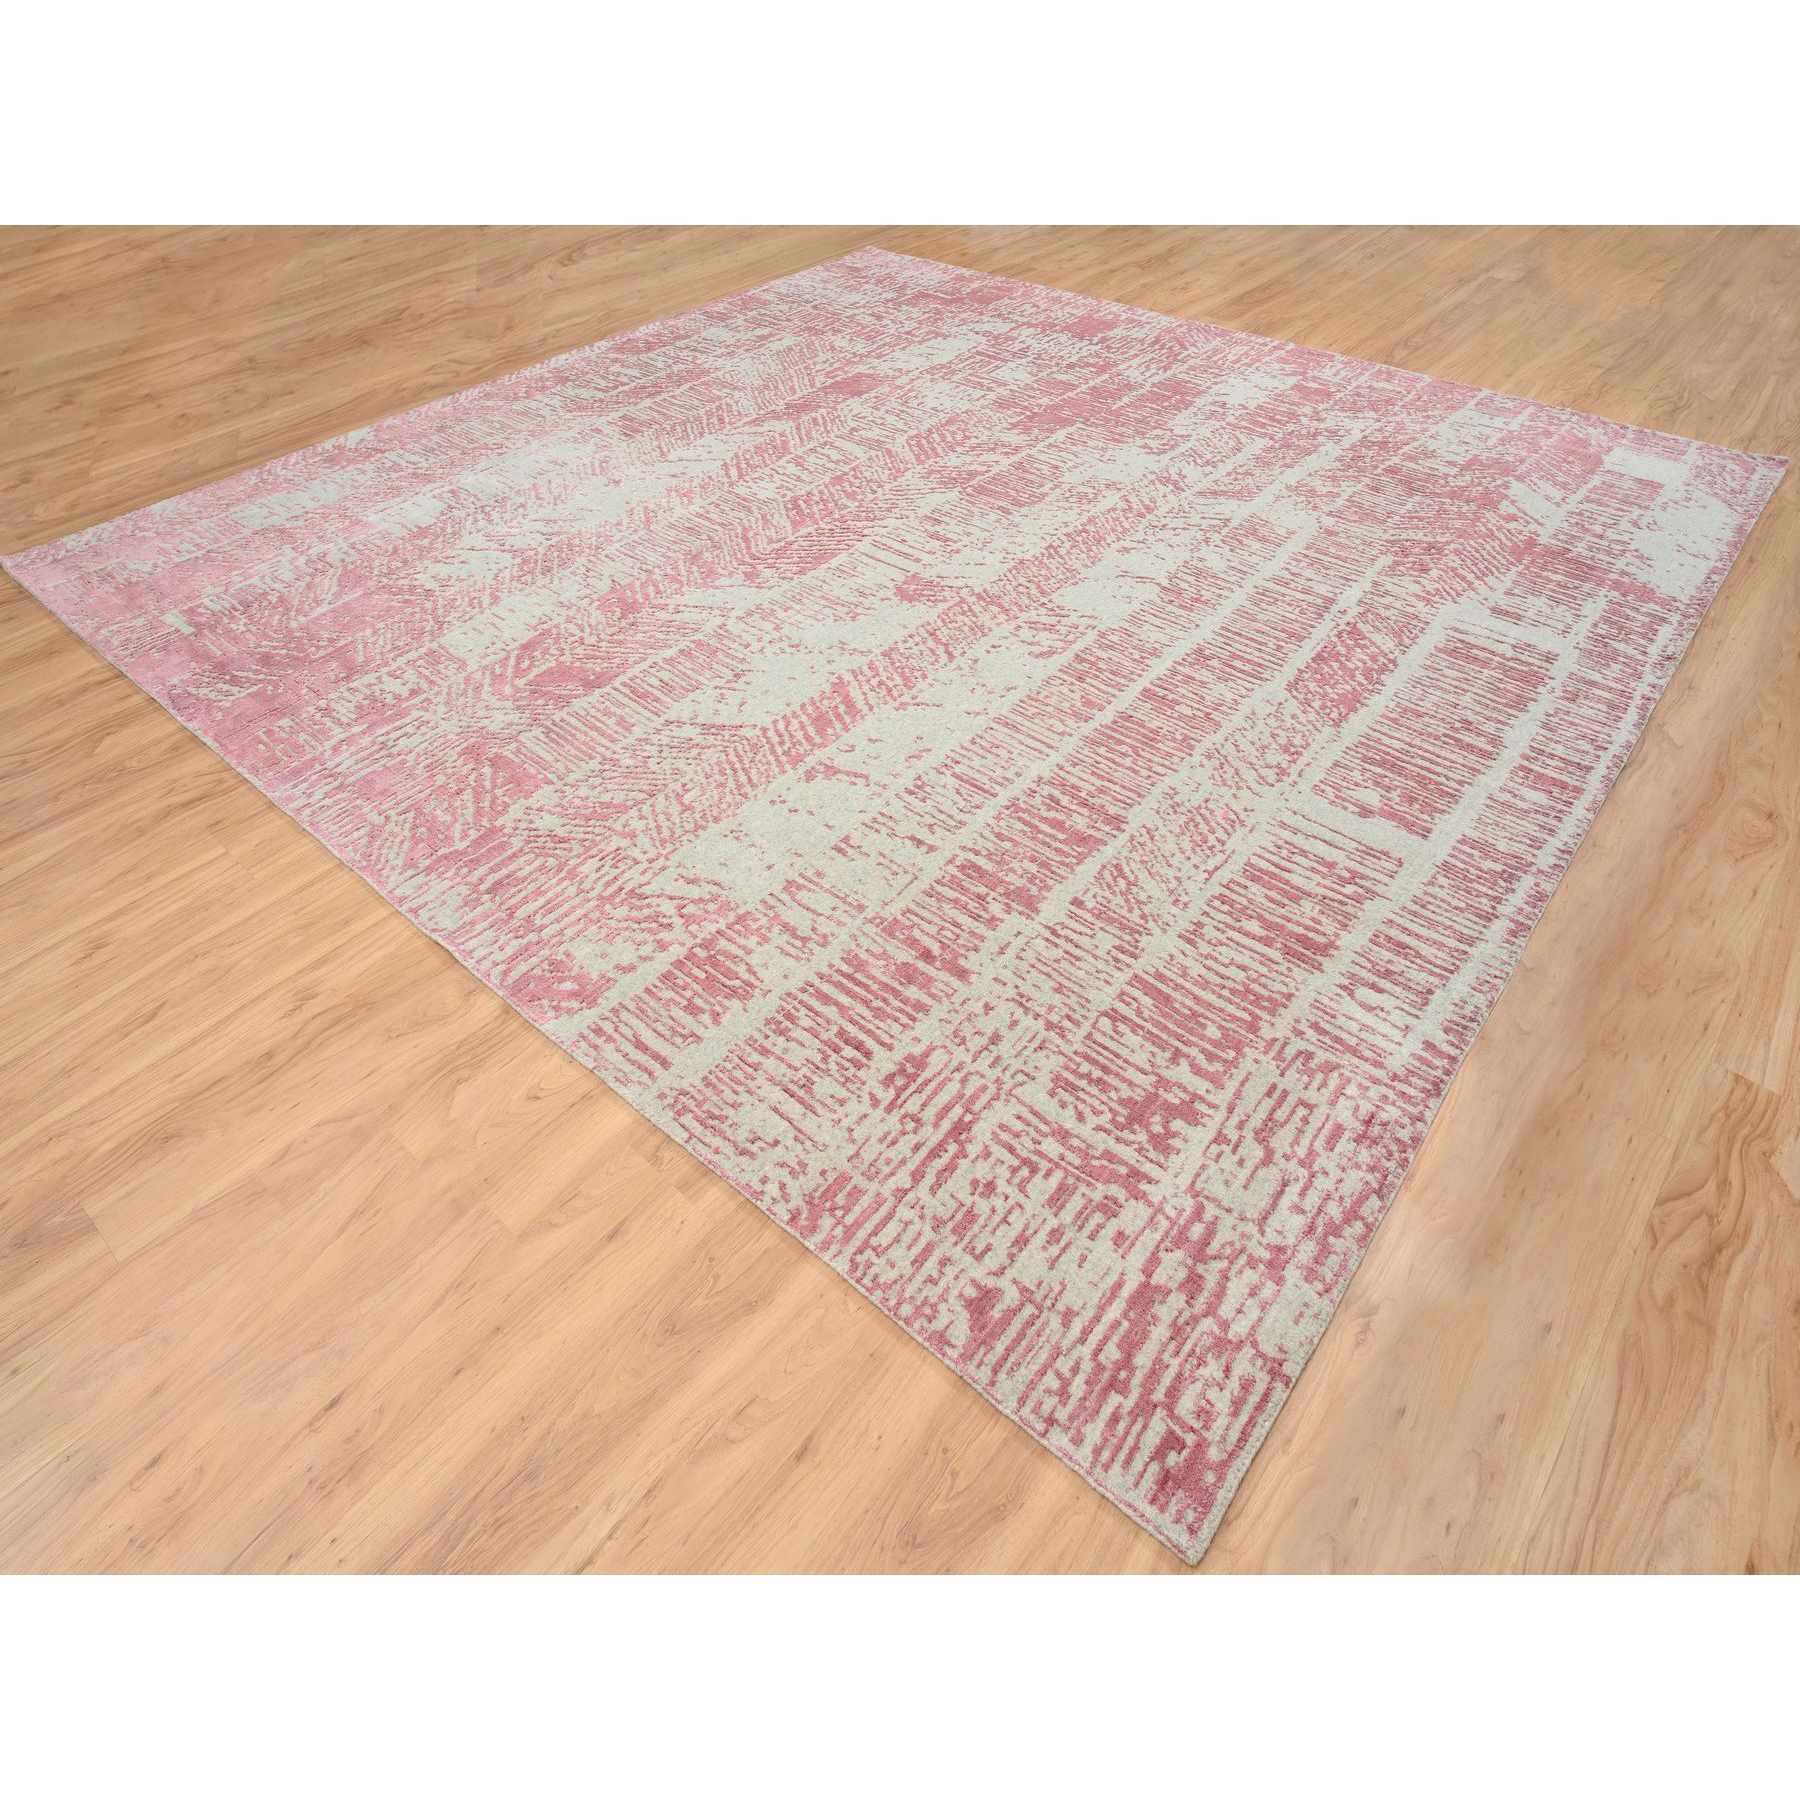 Transitional-Hand-Loomed-Rug-324040